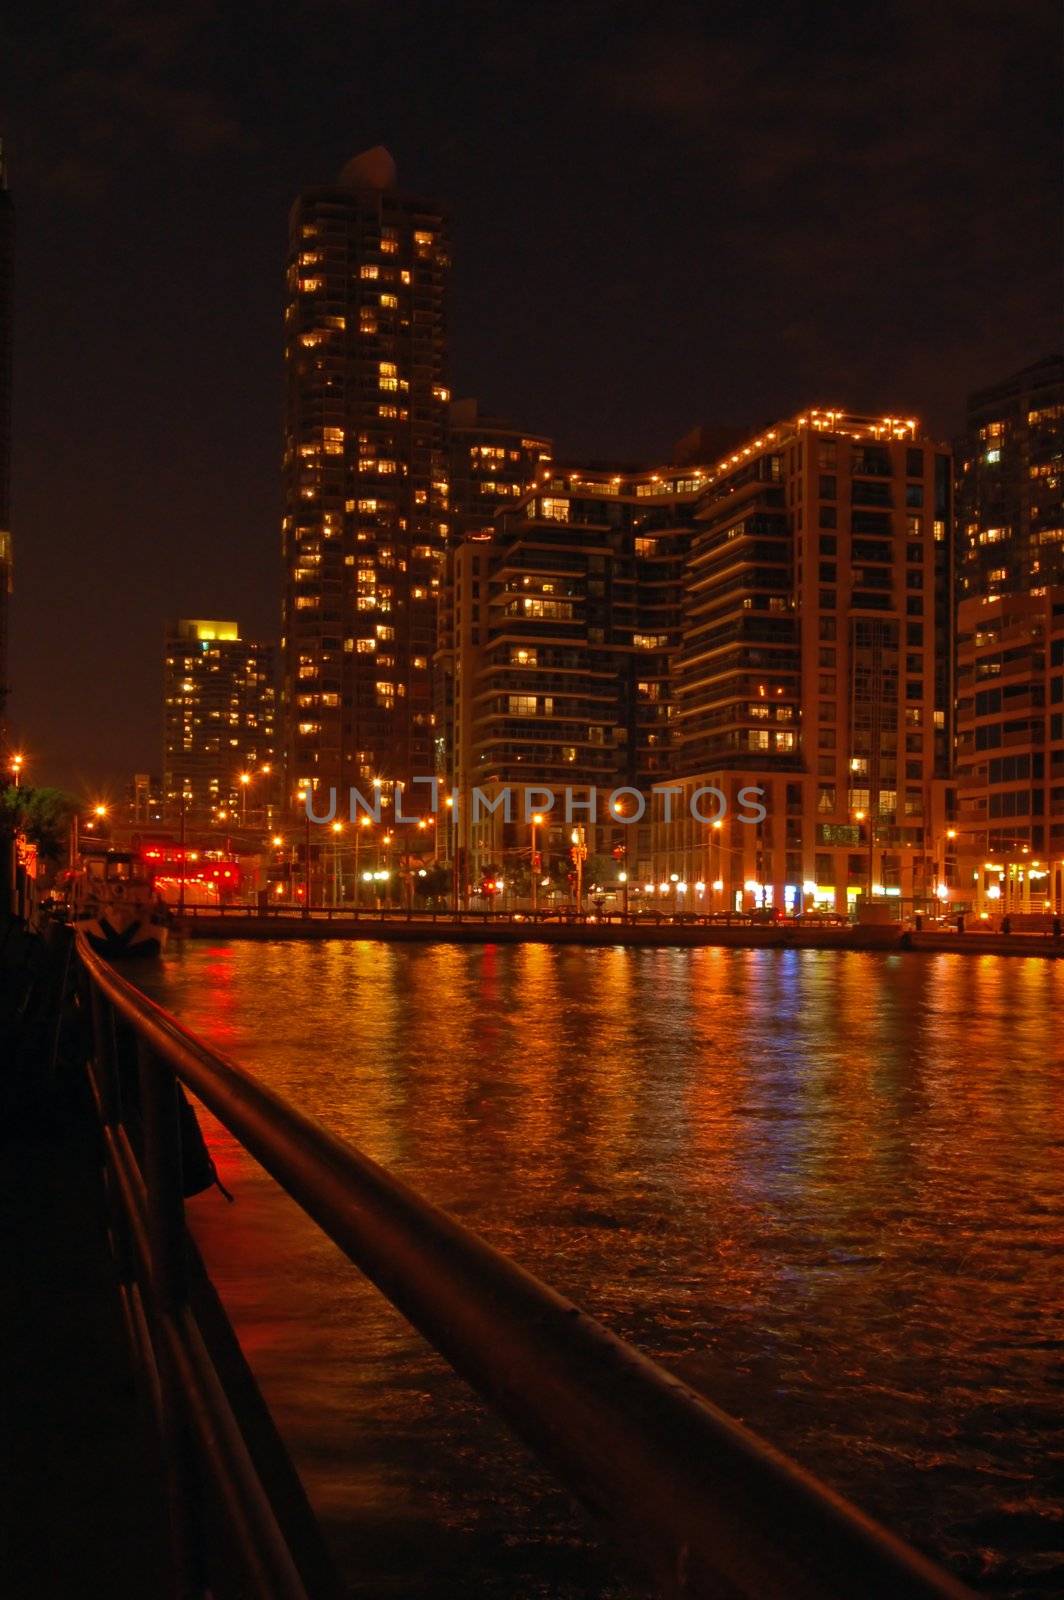 Toronto water front in the night